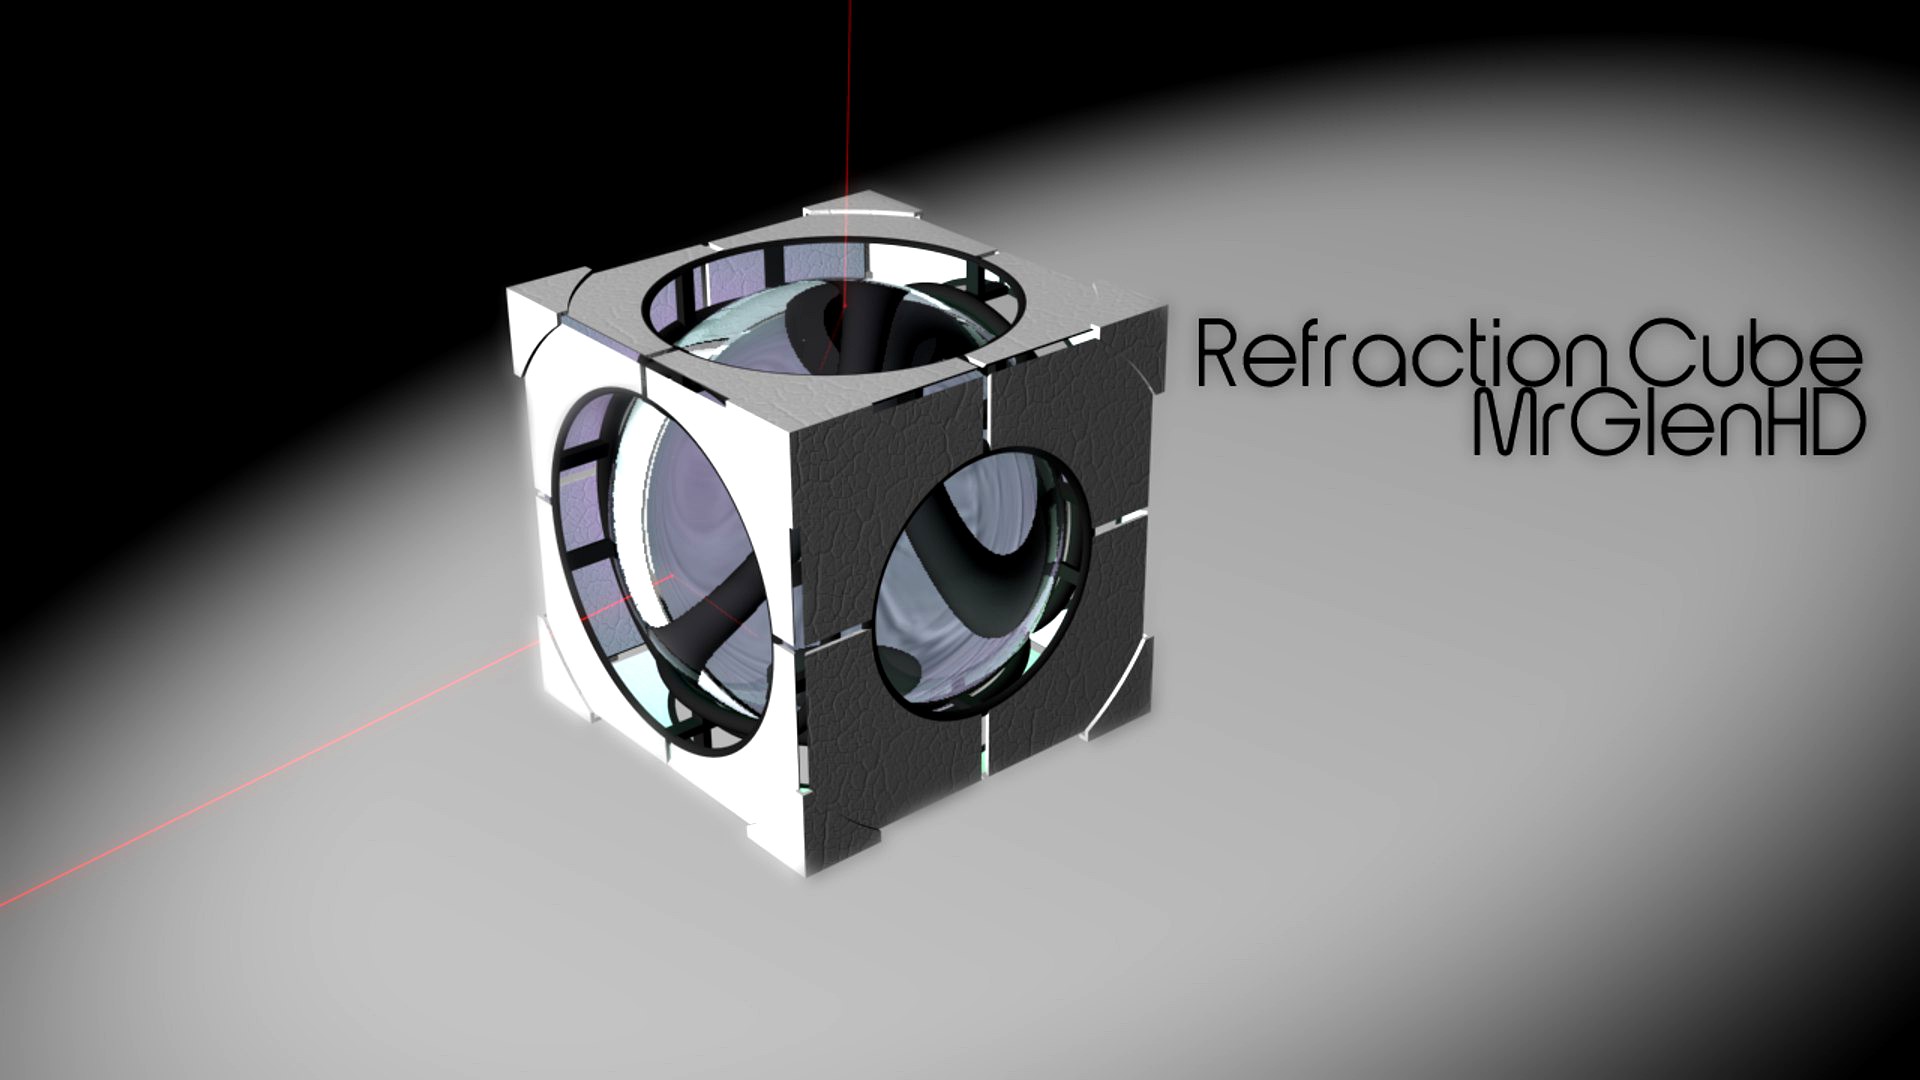 Refraction Cube from Portal 2